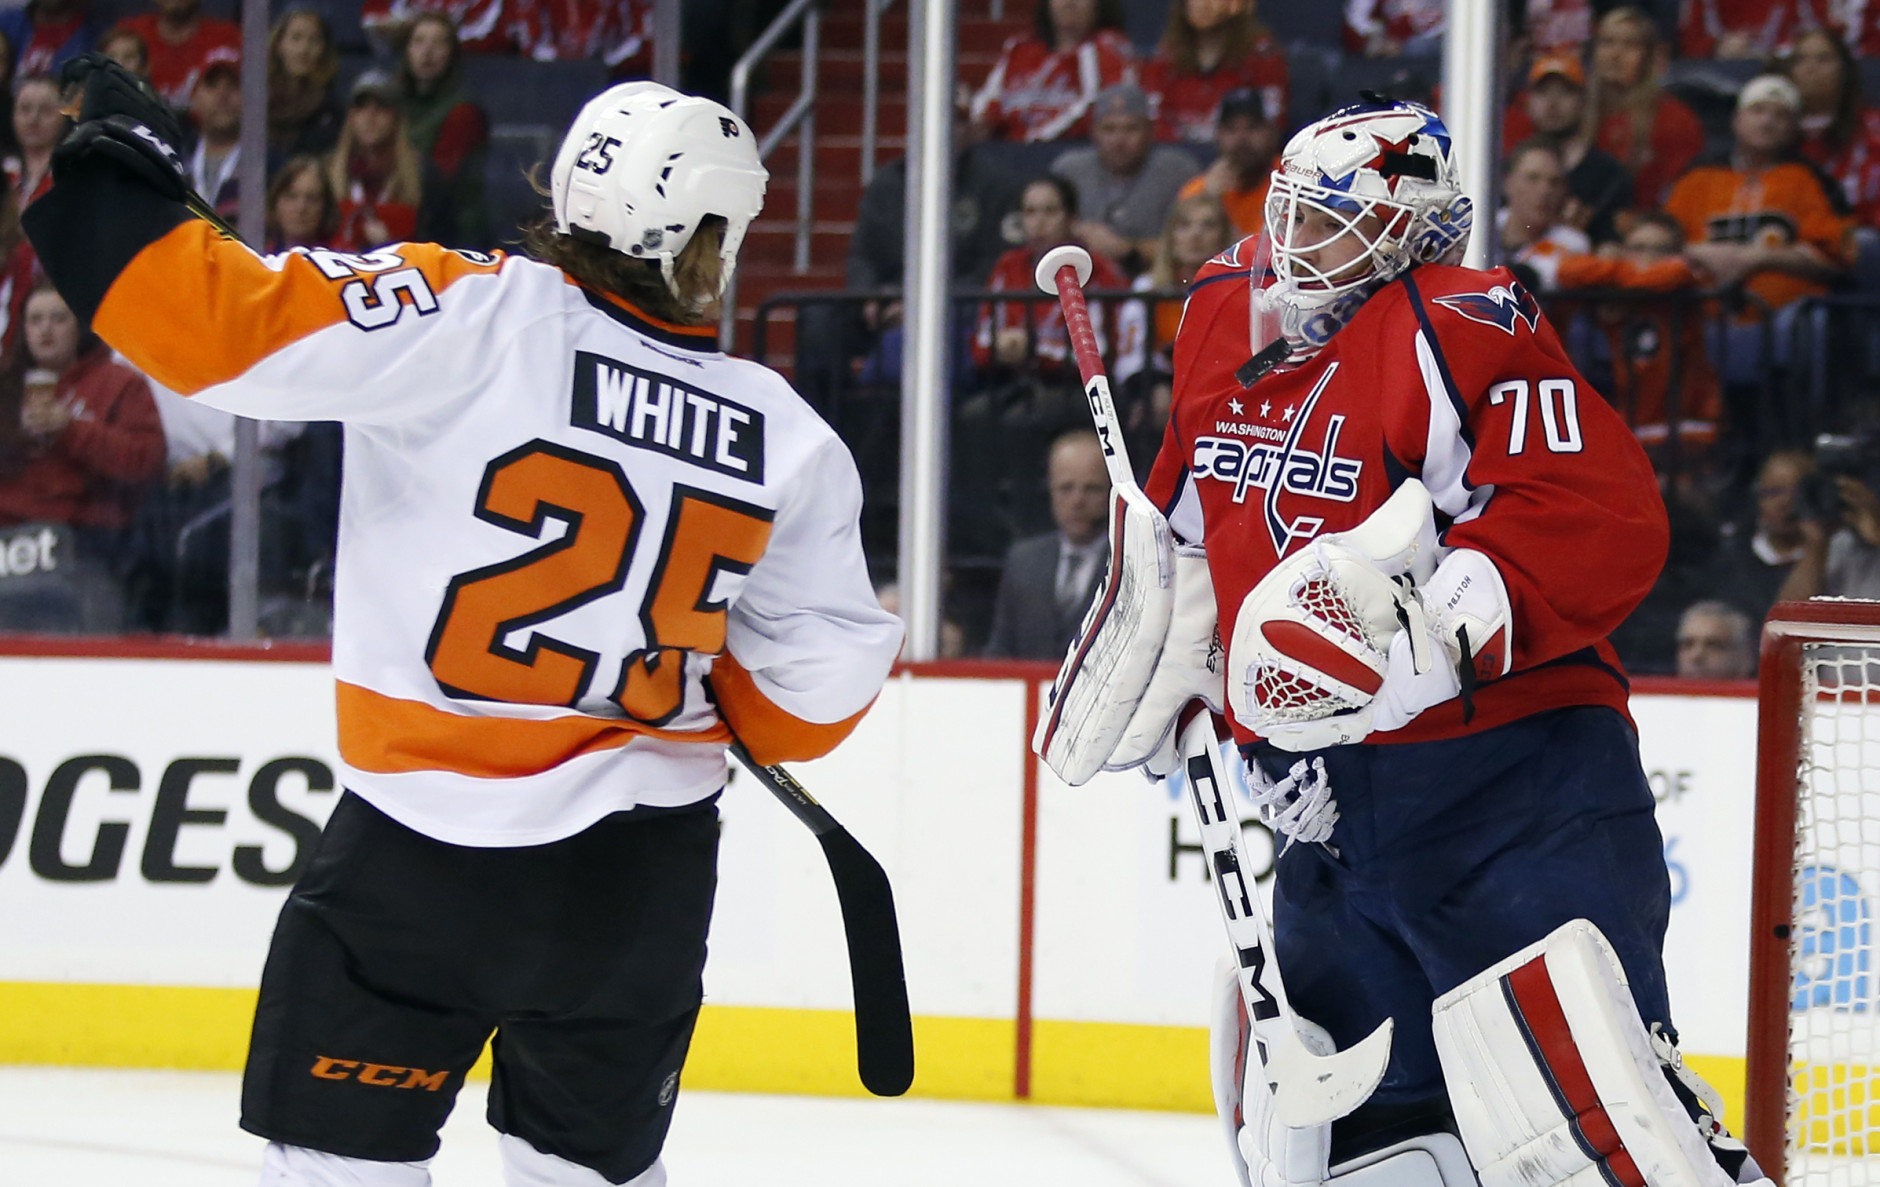 Washington Capitals goalie Braden Holtby (70) blocks a shot with Philadelphia Flyers center Ryan White (25) nearby during the first period of Game 1 of a first-round NHL hockey Stanley Cup playoff series Thursday, April 14, 2016, in Washington. (AP Photo/Alex Brandon)